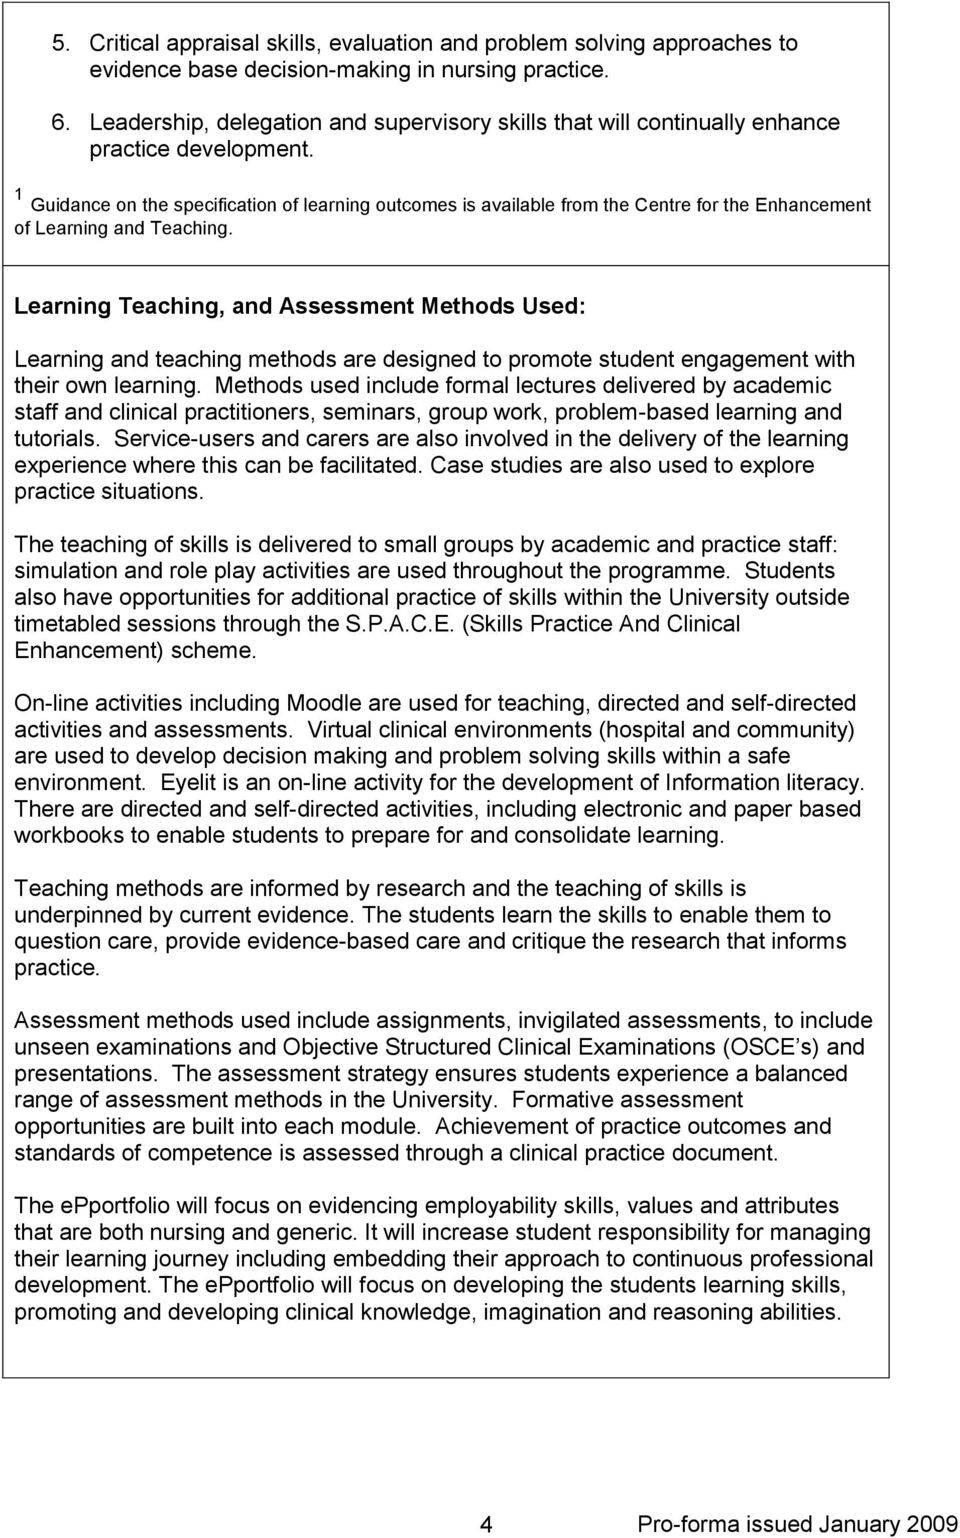 1 Guidance on the specification of learning outcomes is available from the Centre for the Enhancement of Learning and Teaching.